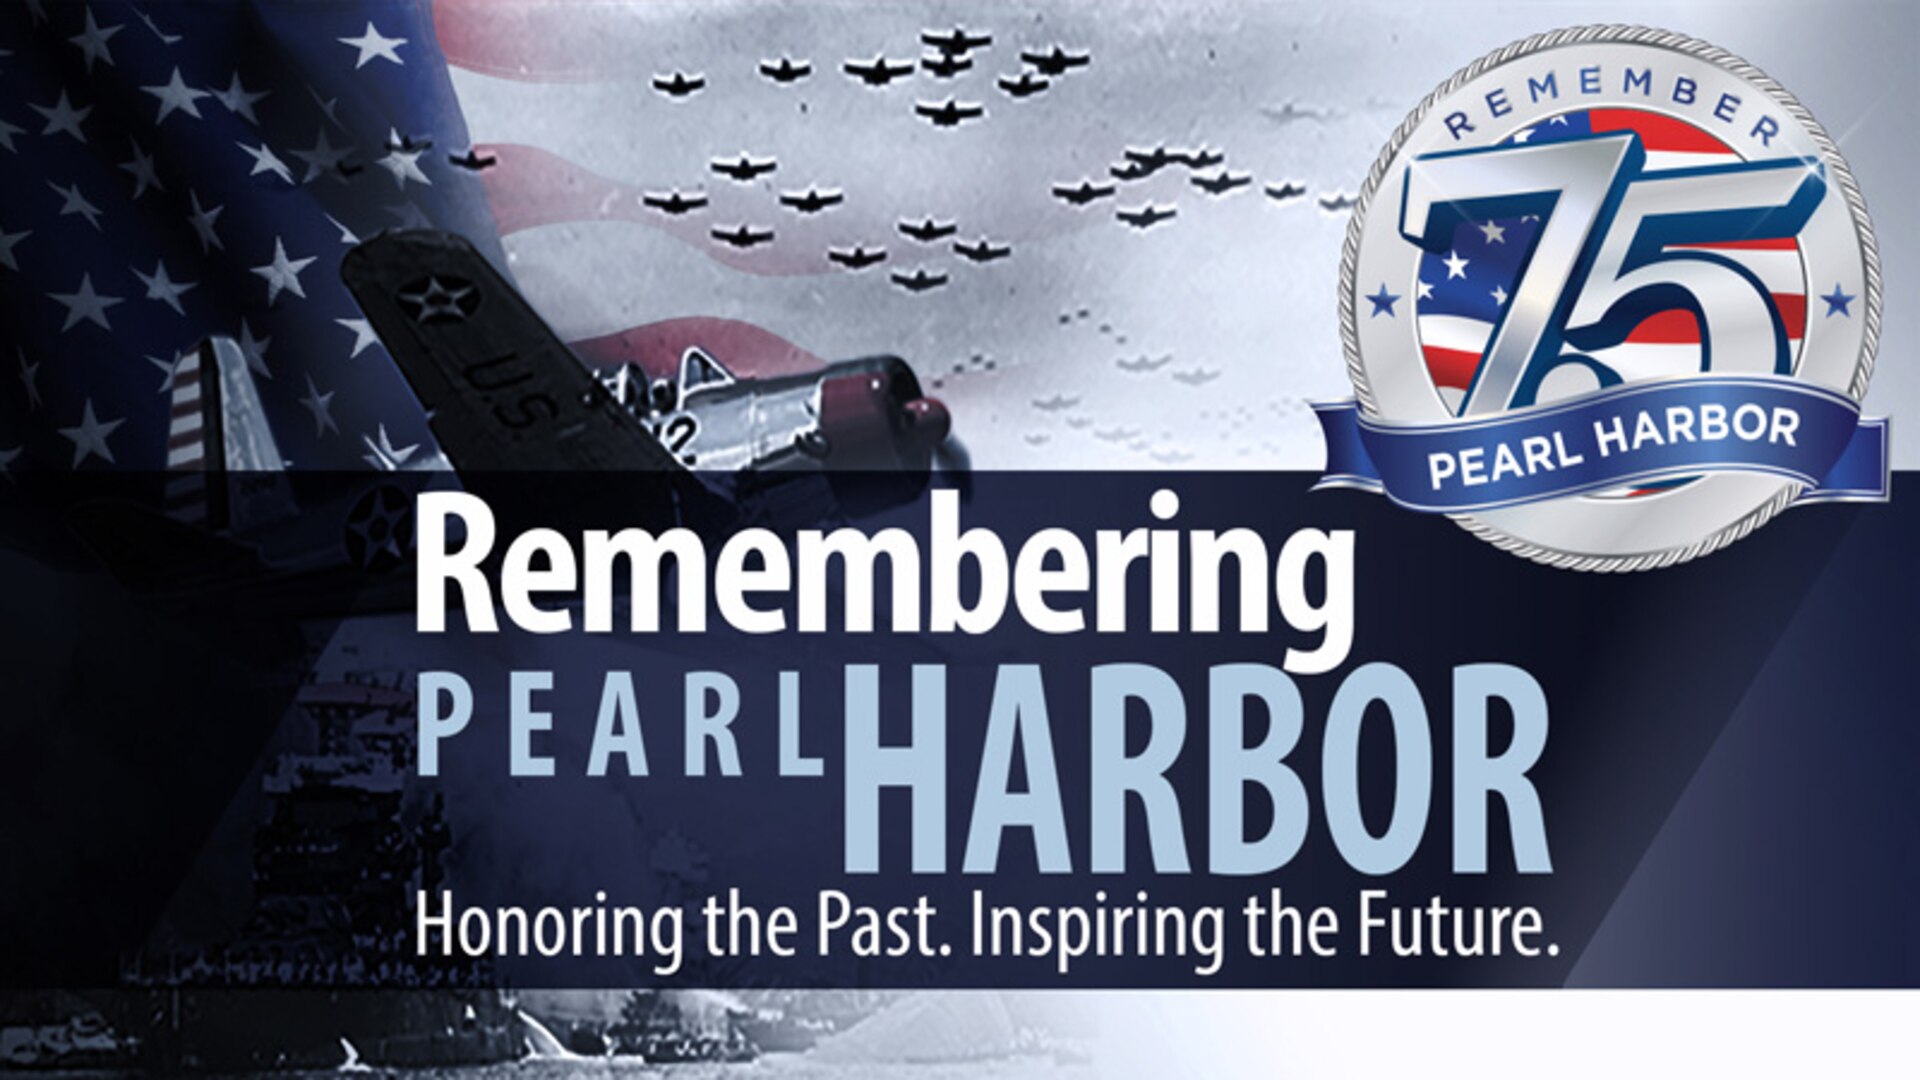 As the nation observes the 75th anniversary of the Dec. 7, 1941, attack on Pearl Harbor, Hawaii, the Defense Department honors the men and women who lost their lives, and those who fought on to preserve the nation's freedom.